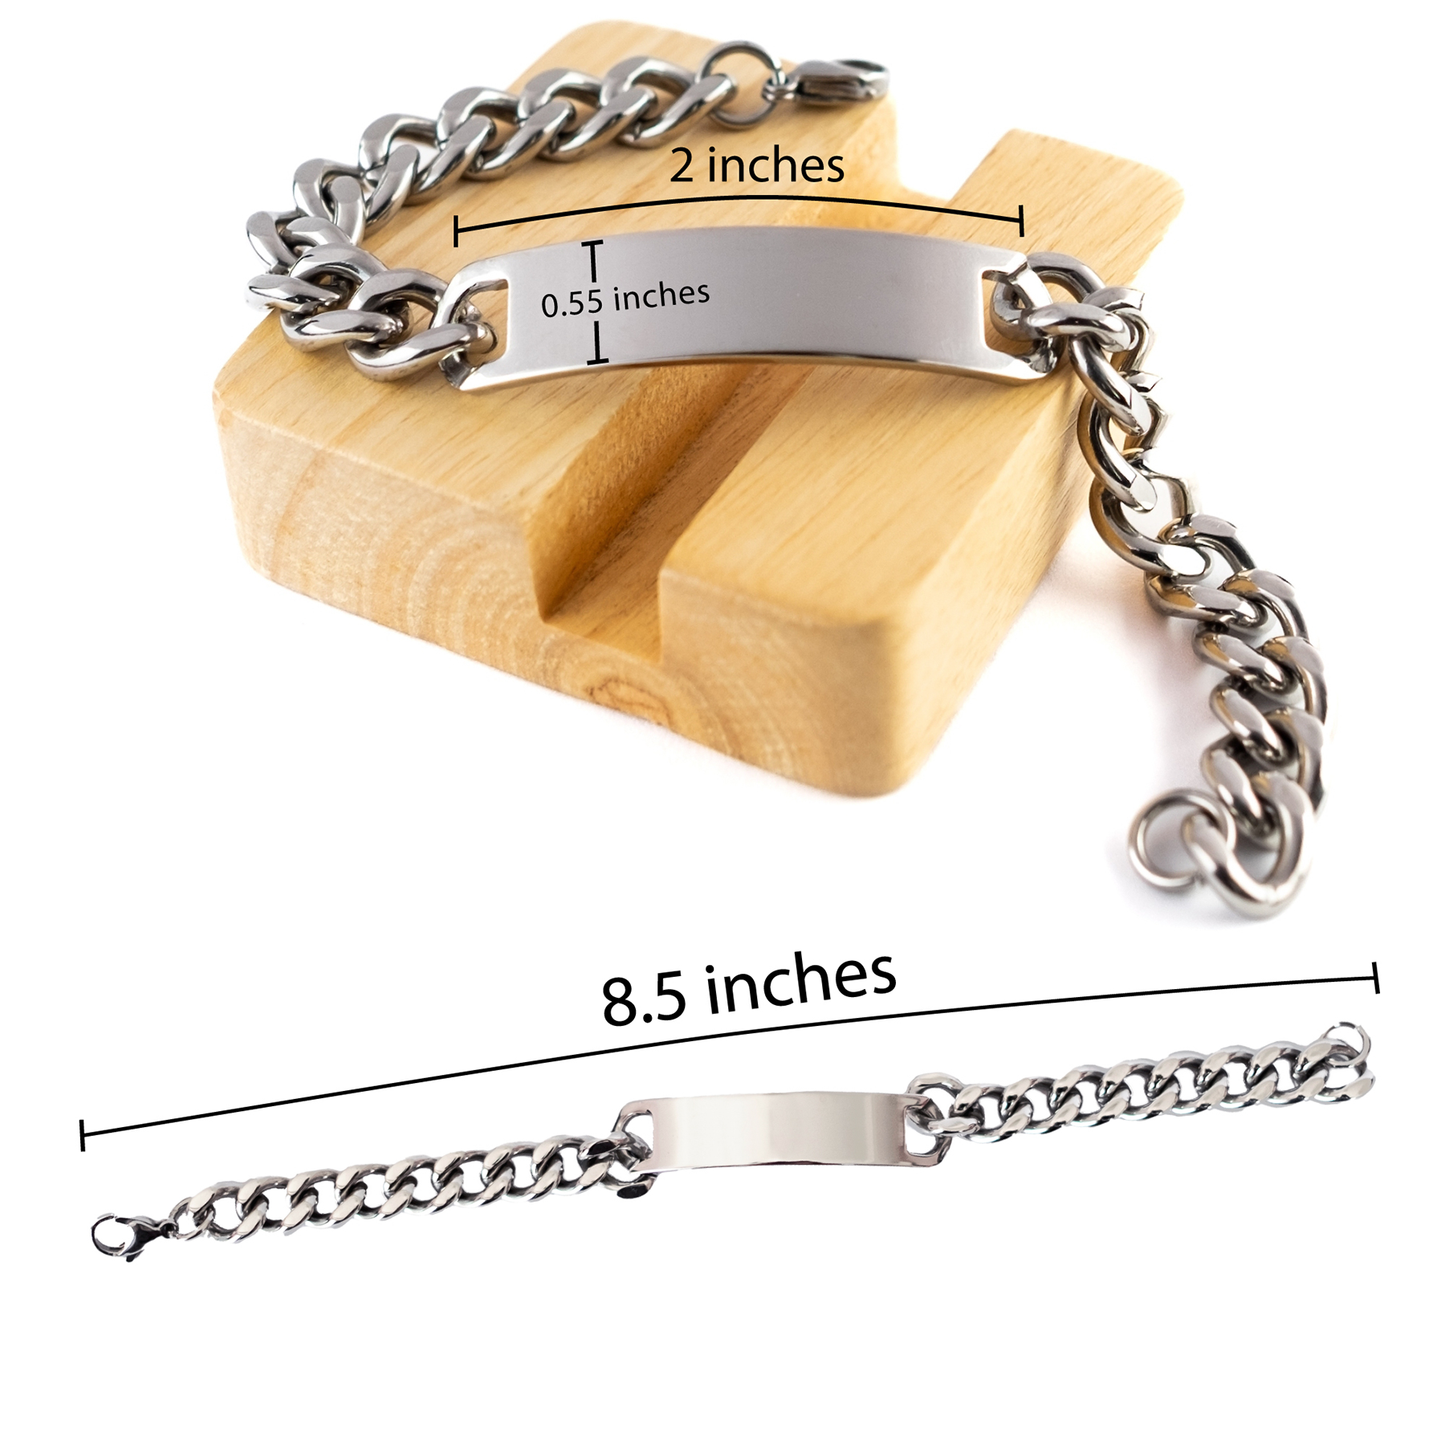 Stepson Motivational Gifts from Stepdad, Remember to never give up no matter what, Inspirational Birthday Cuban Chain Stainless Steel Bracelet for Stepson